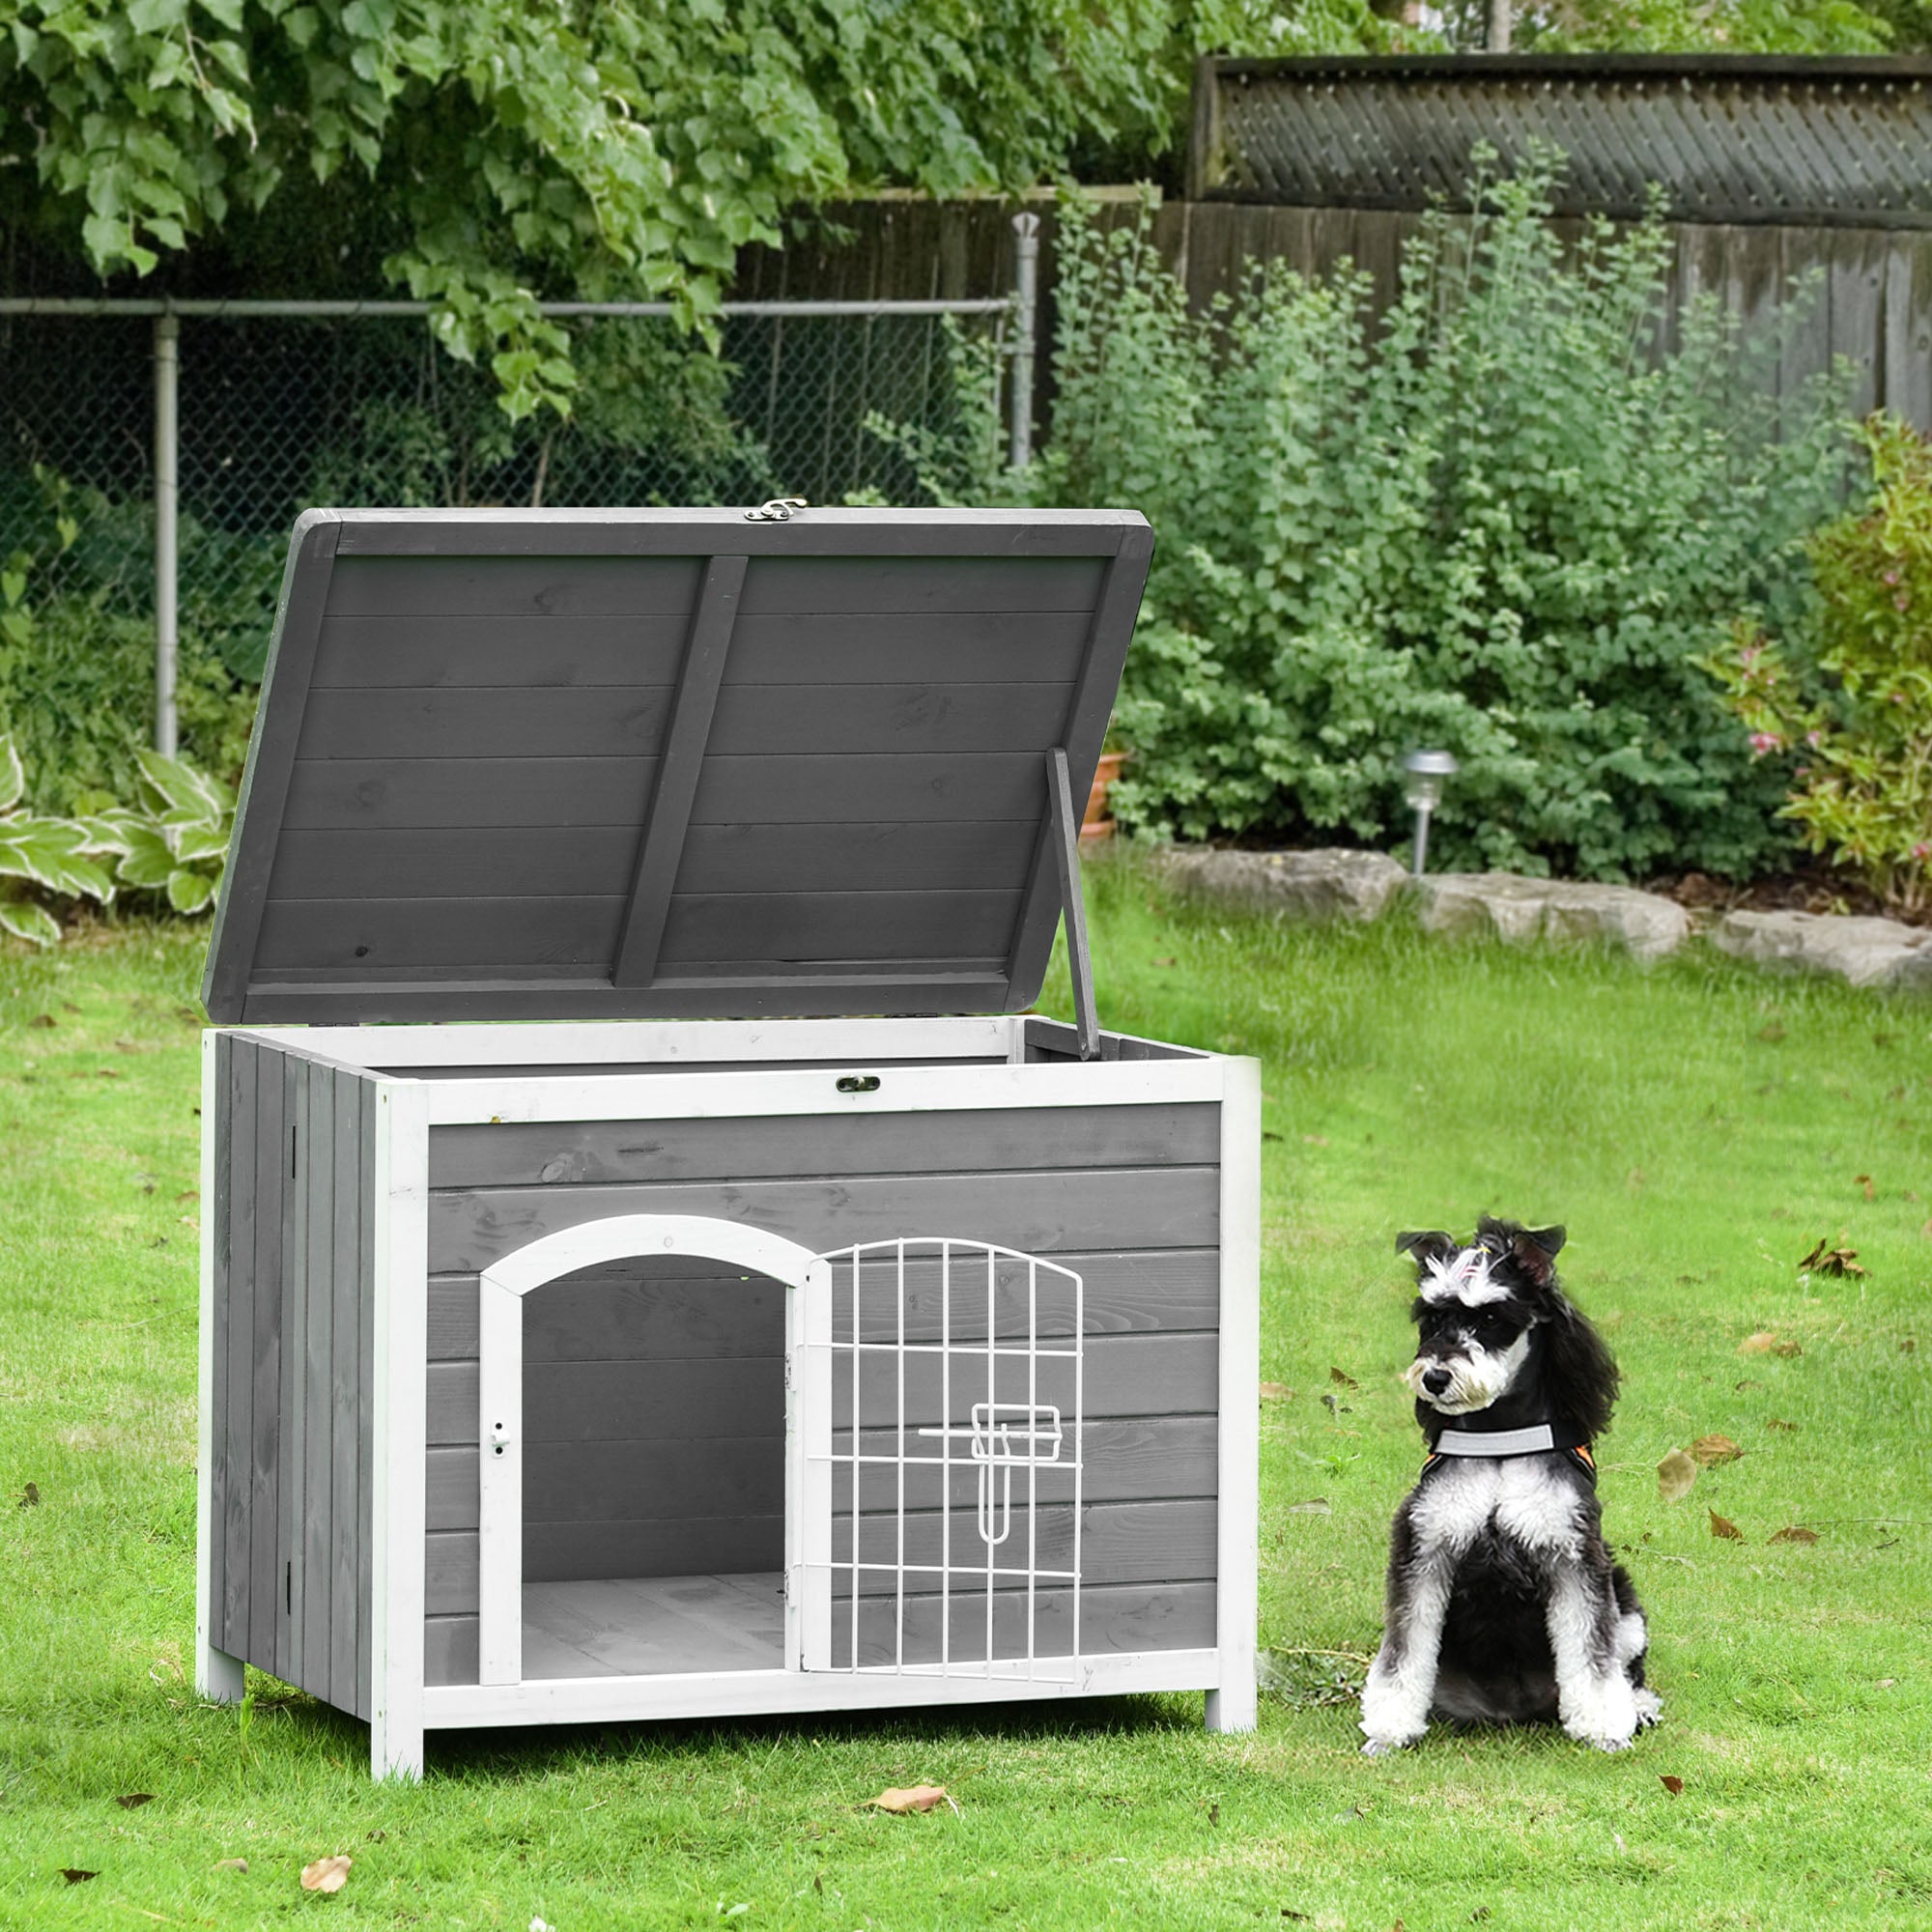 Andoer Foldable Raised Wooden Dog House Indoor and Outdoor Dog Cage Kennel Cat House w/ Lockable Door Openable Roof Removable Bottom for Small and Medium Pets Grey